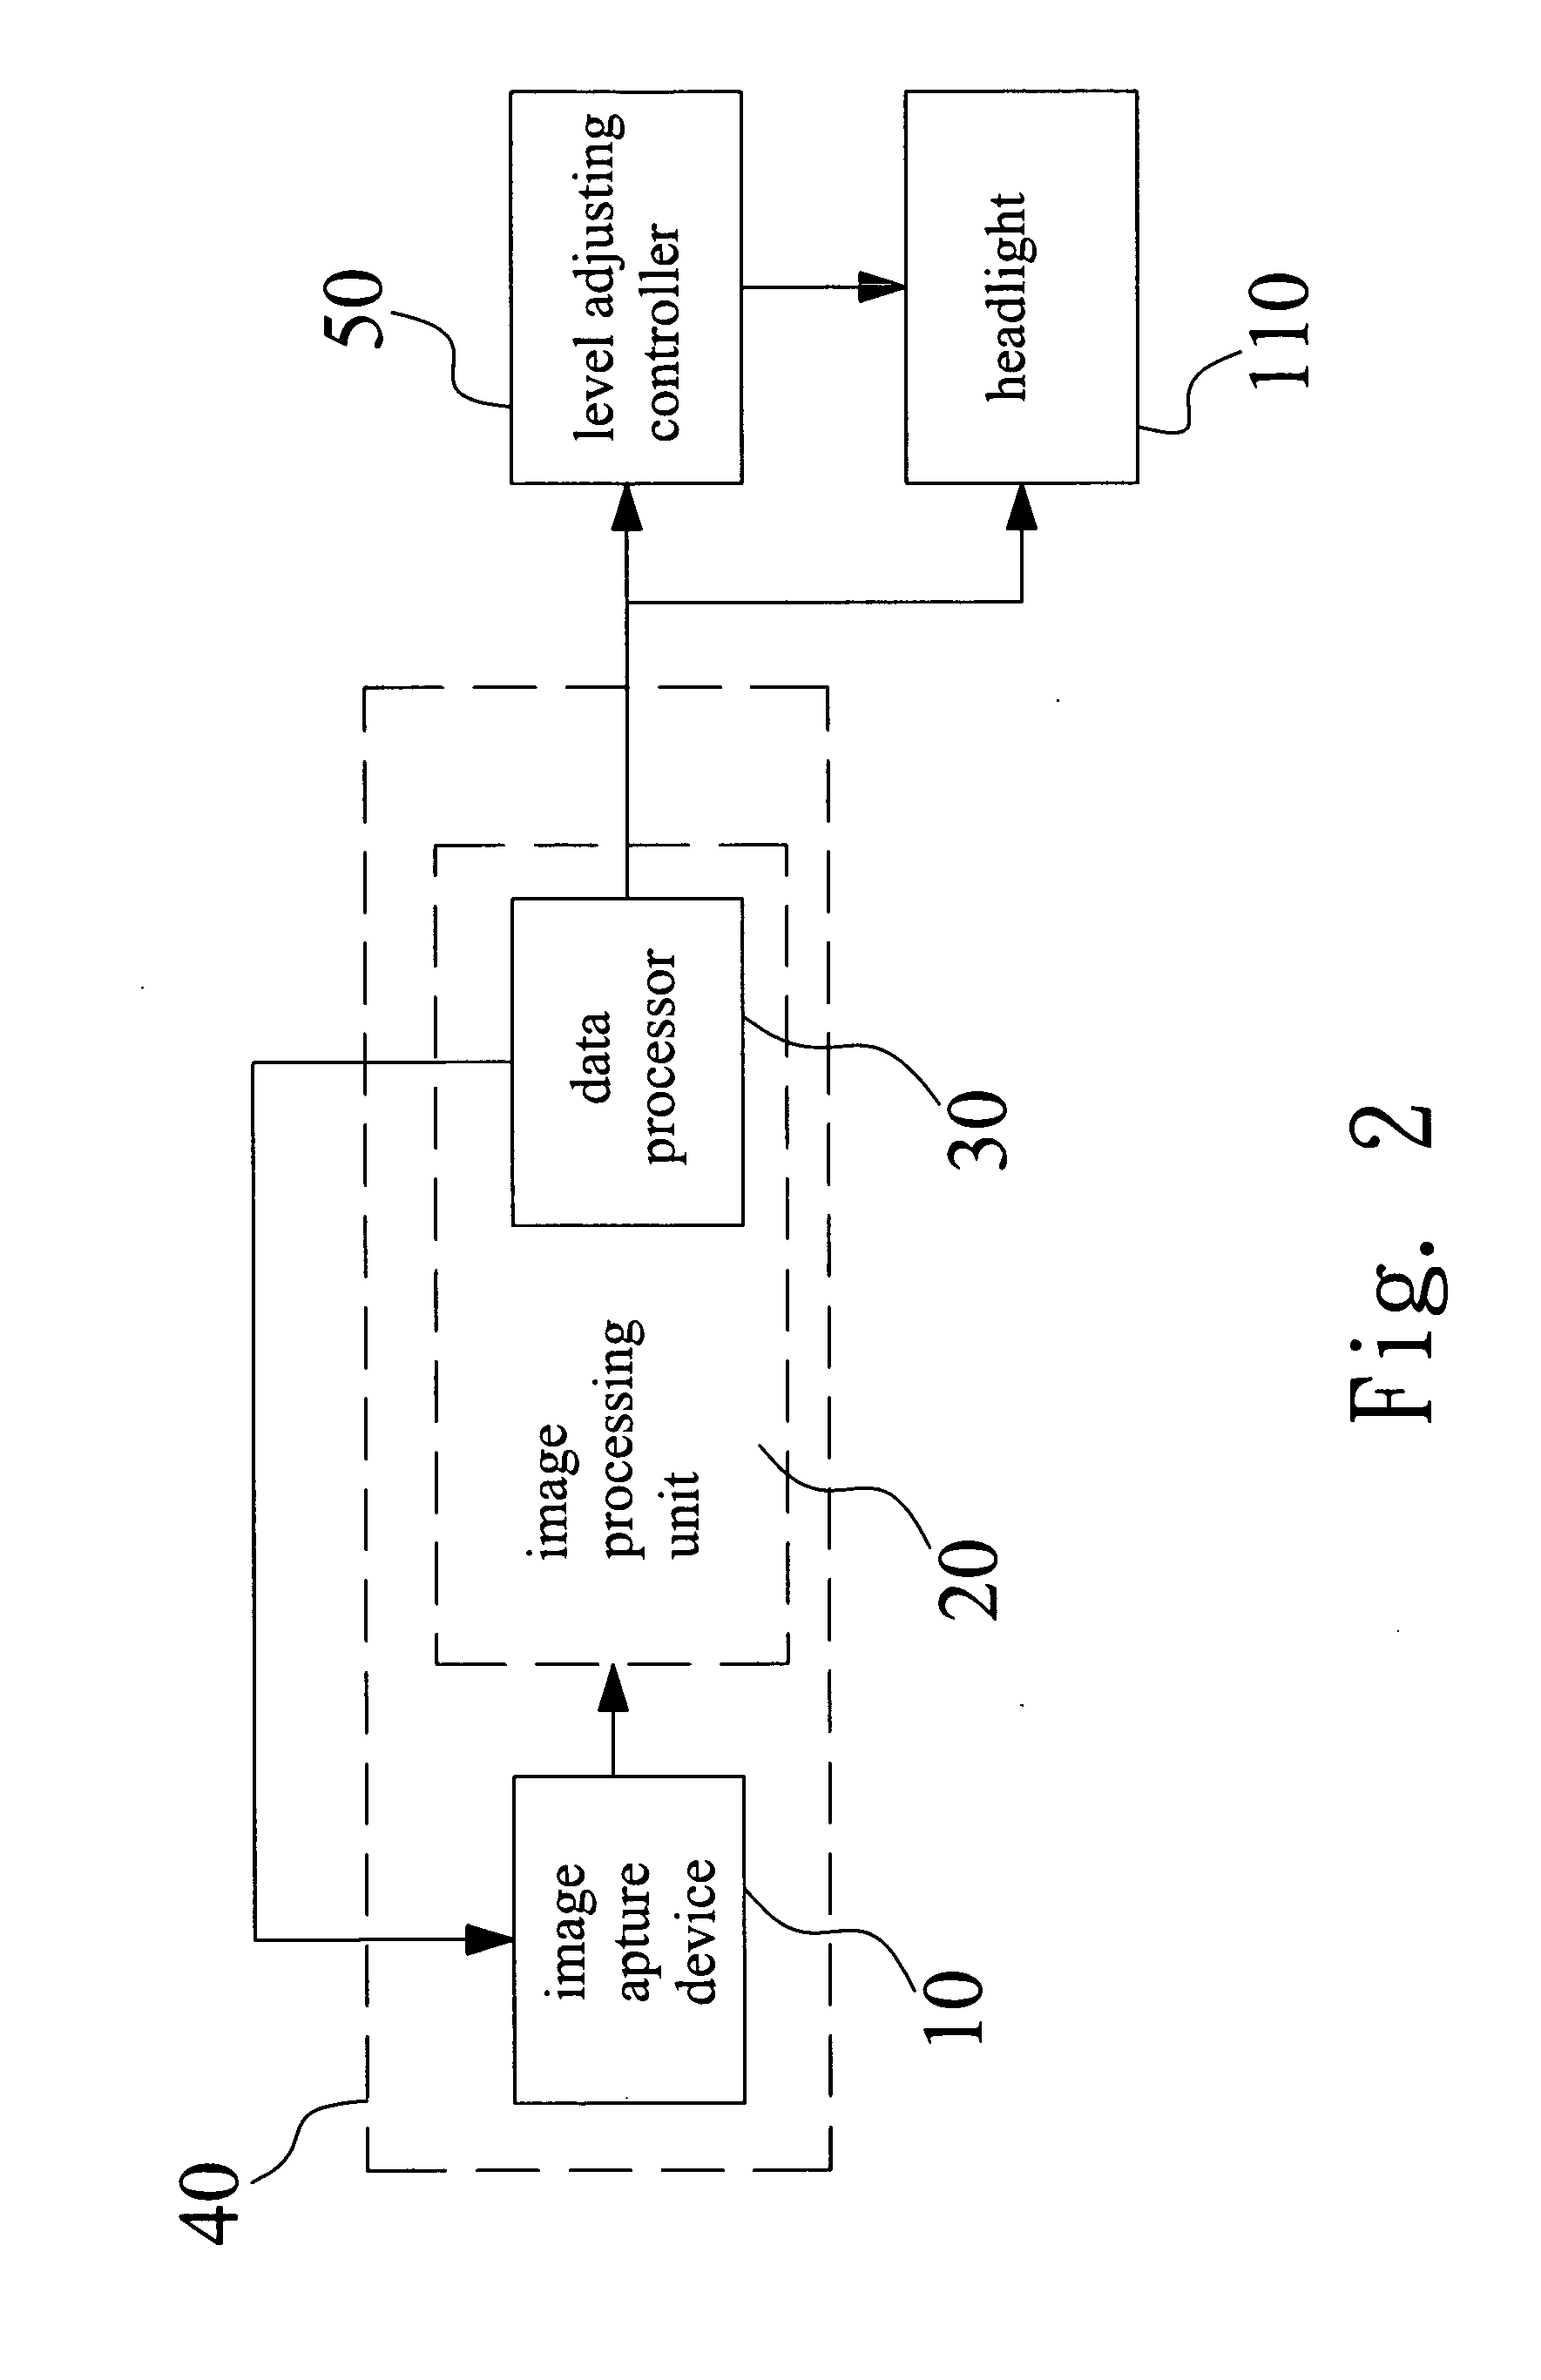 Vehicular tilt-sensing method and automatic headlight leveling system using the same